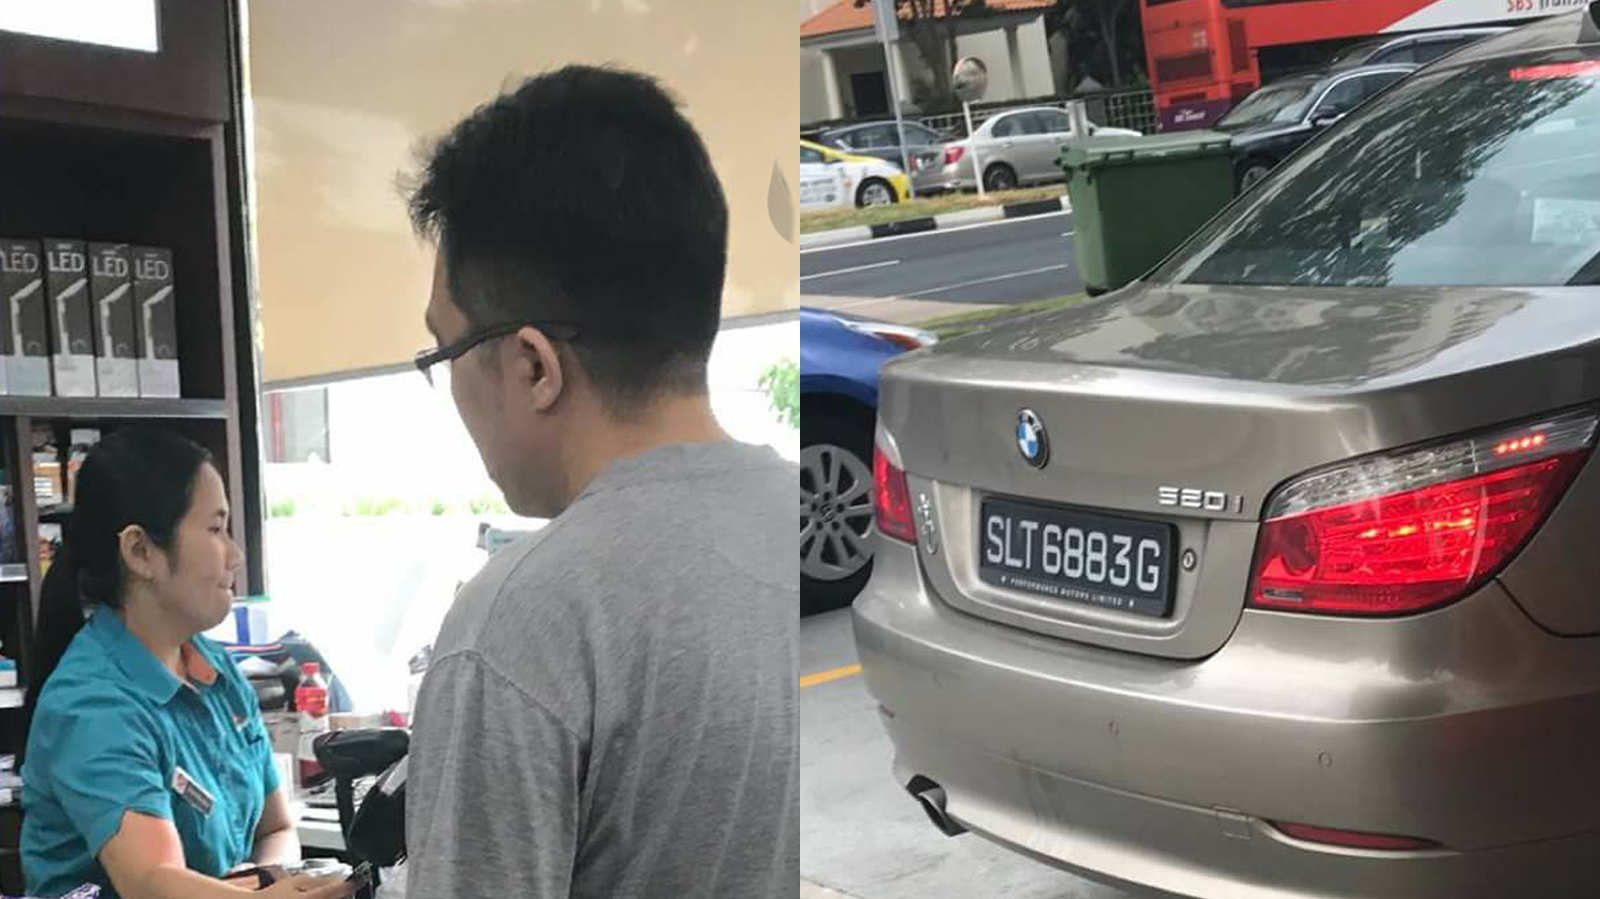 The real heroes of the Caltex pump attendant versus BMW driver incident